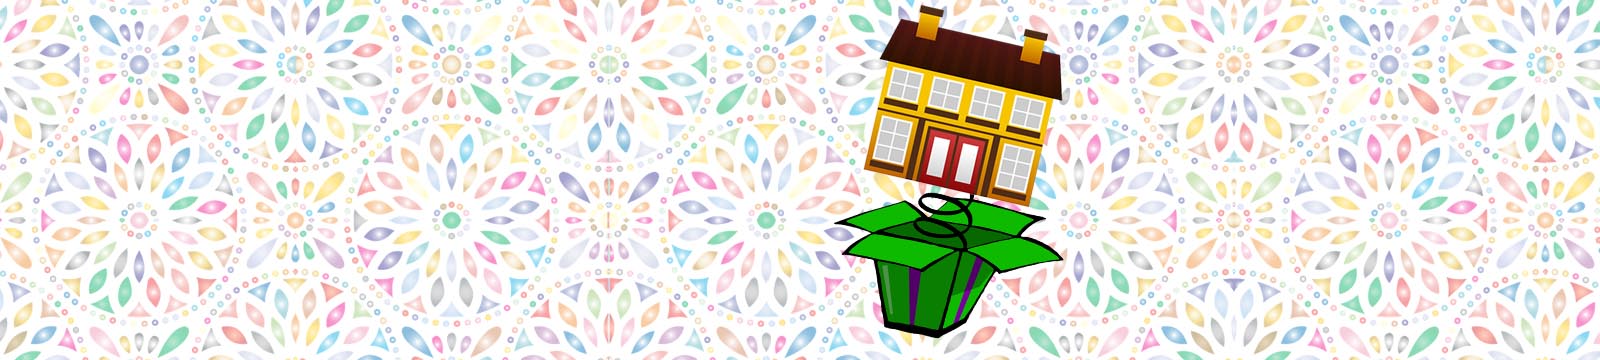 Graphic of a house popping out of a jack in the box style spring box. Floral pattern in background.